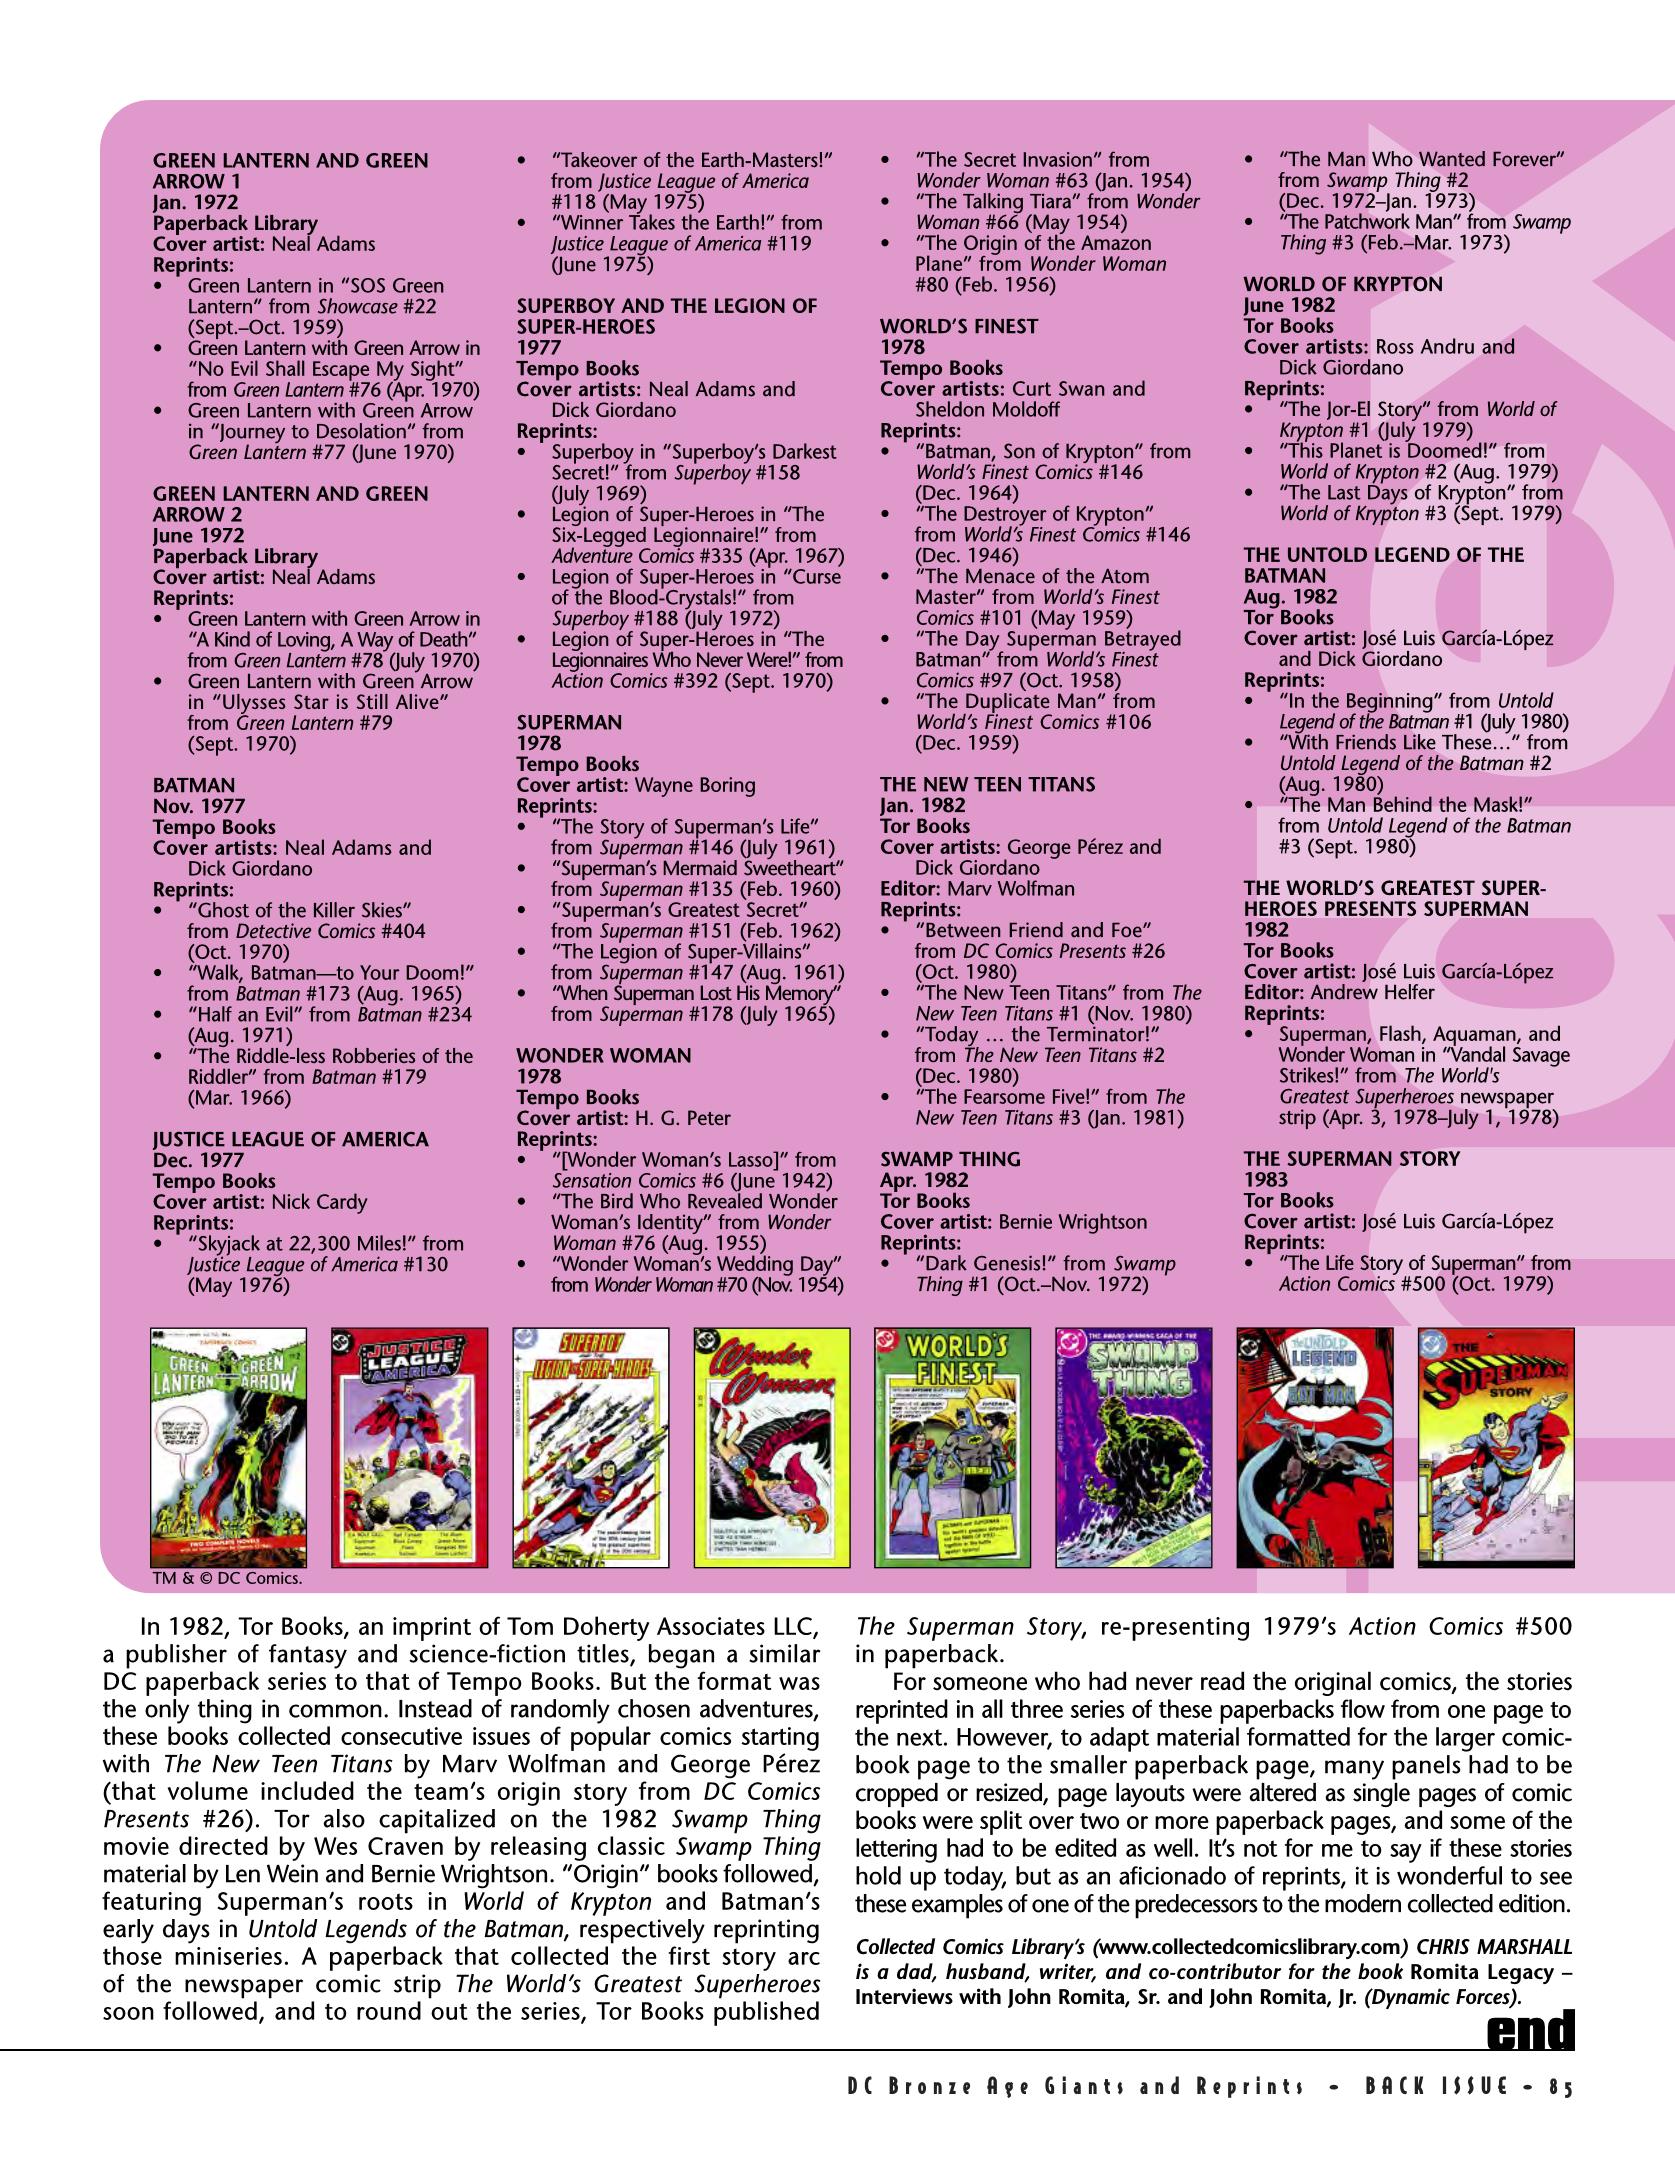 Read online Back Issue comic -  Issue #81 - 89